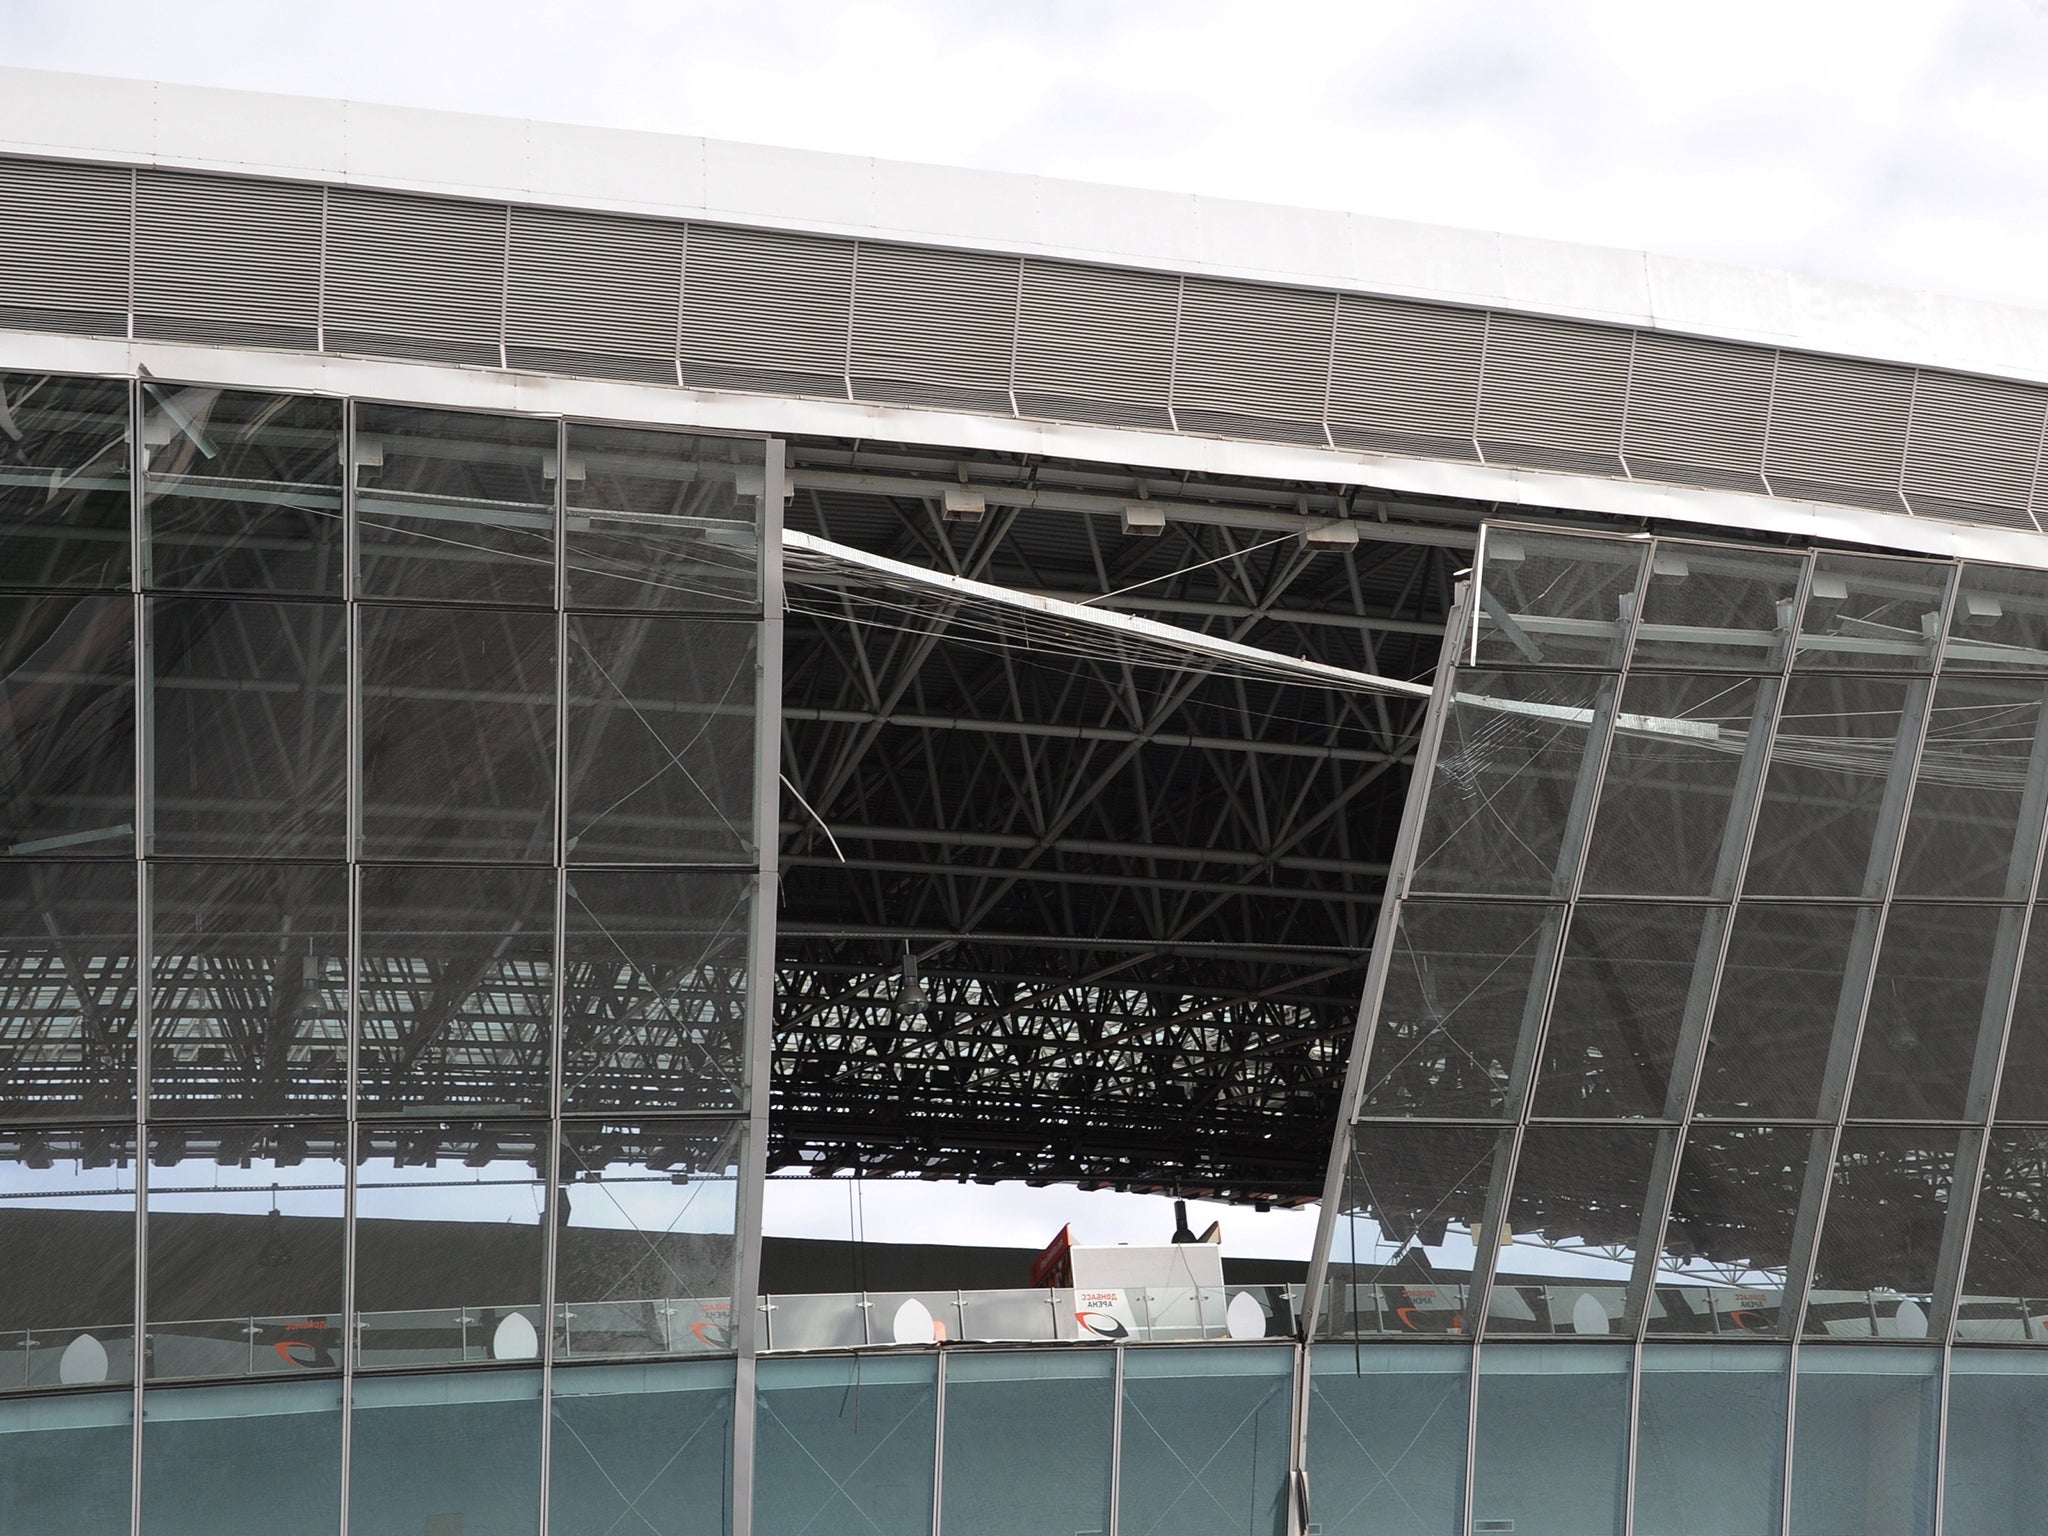 A photo taken on October 20, 2014 shows the Donbas Arena stadium in Donetsk damaged following a nearby explosion.